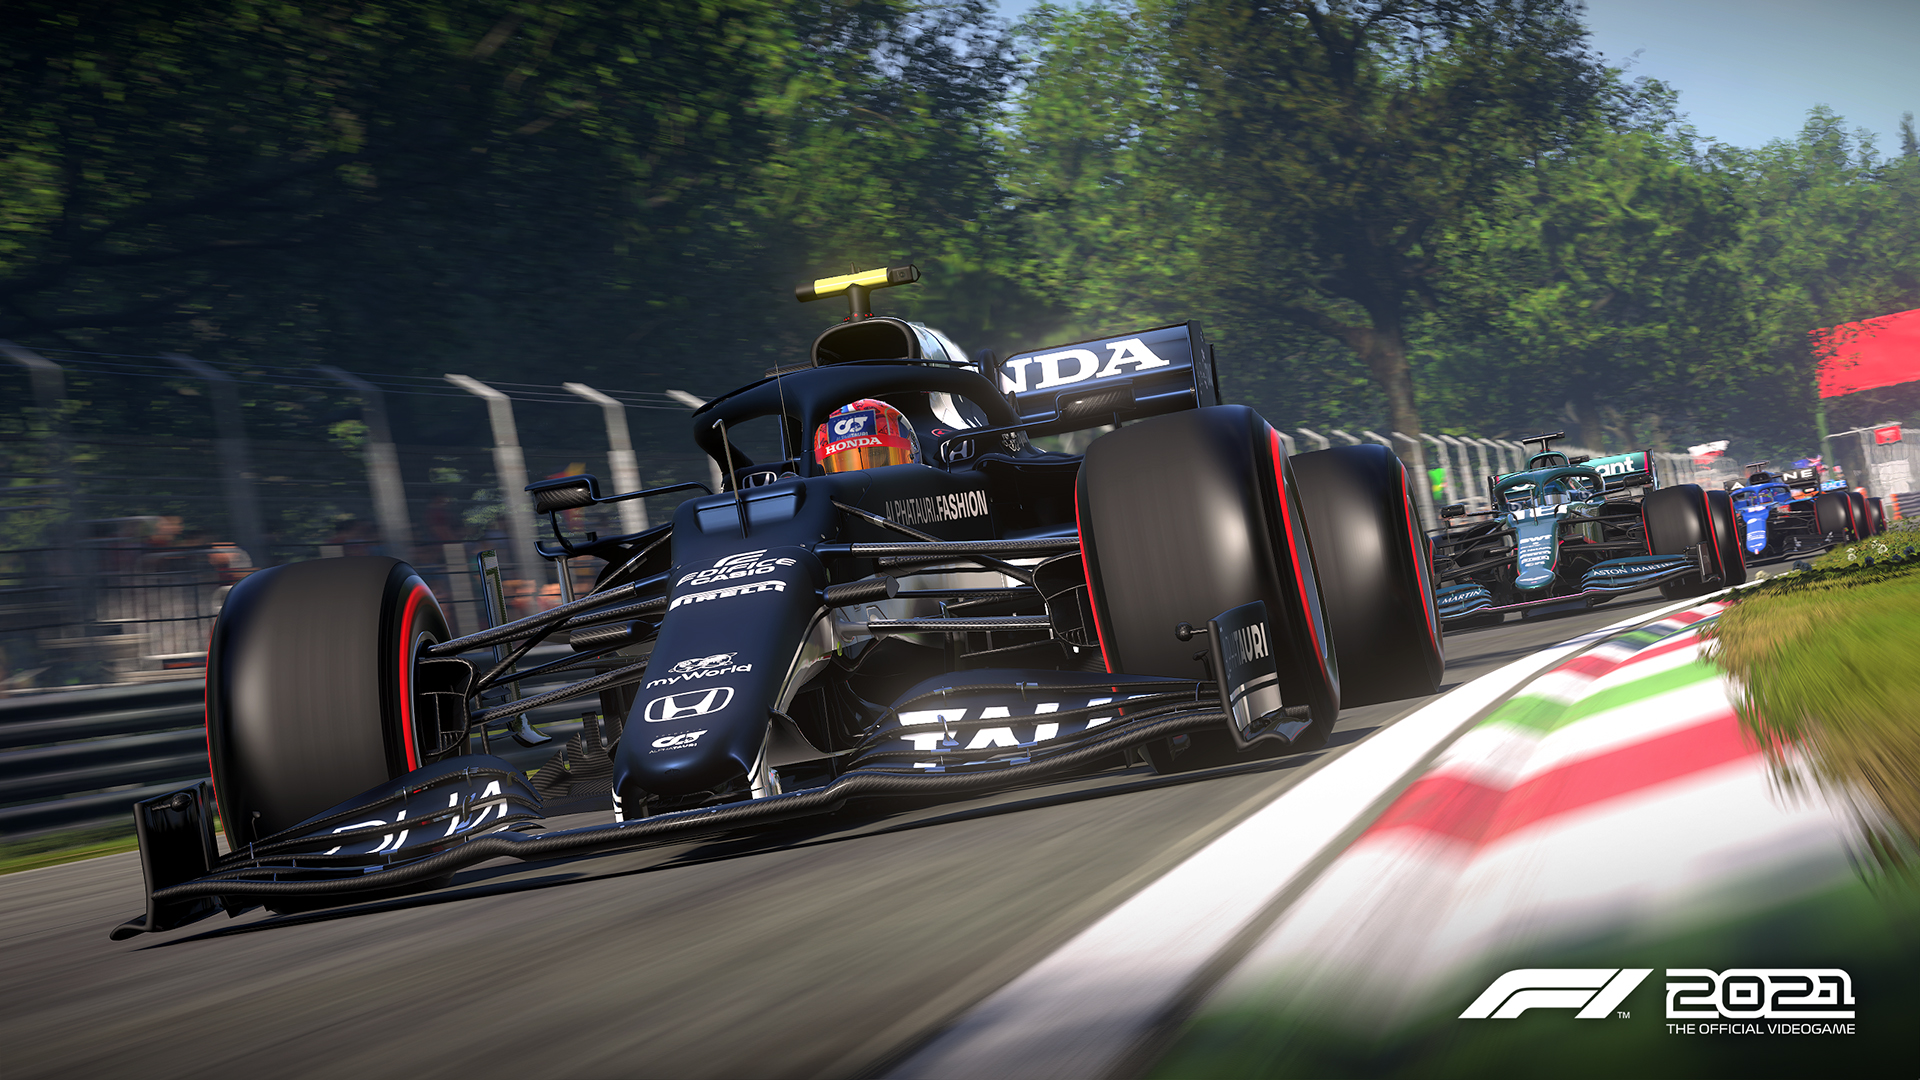 F1 2021 Free Trial Through the Weekend on Xbox, PlayStation, Steam